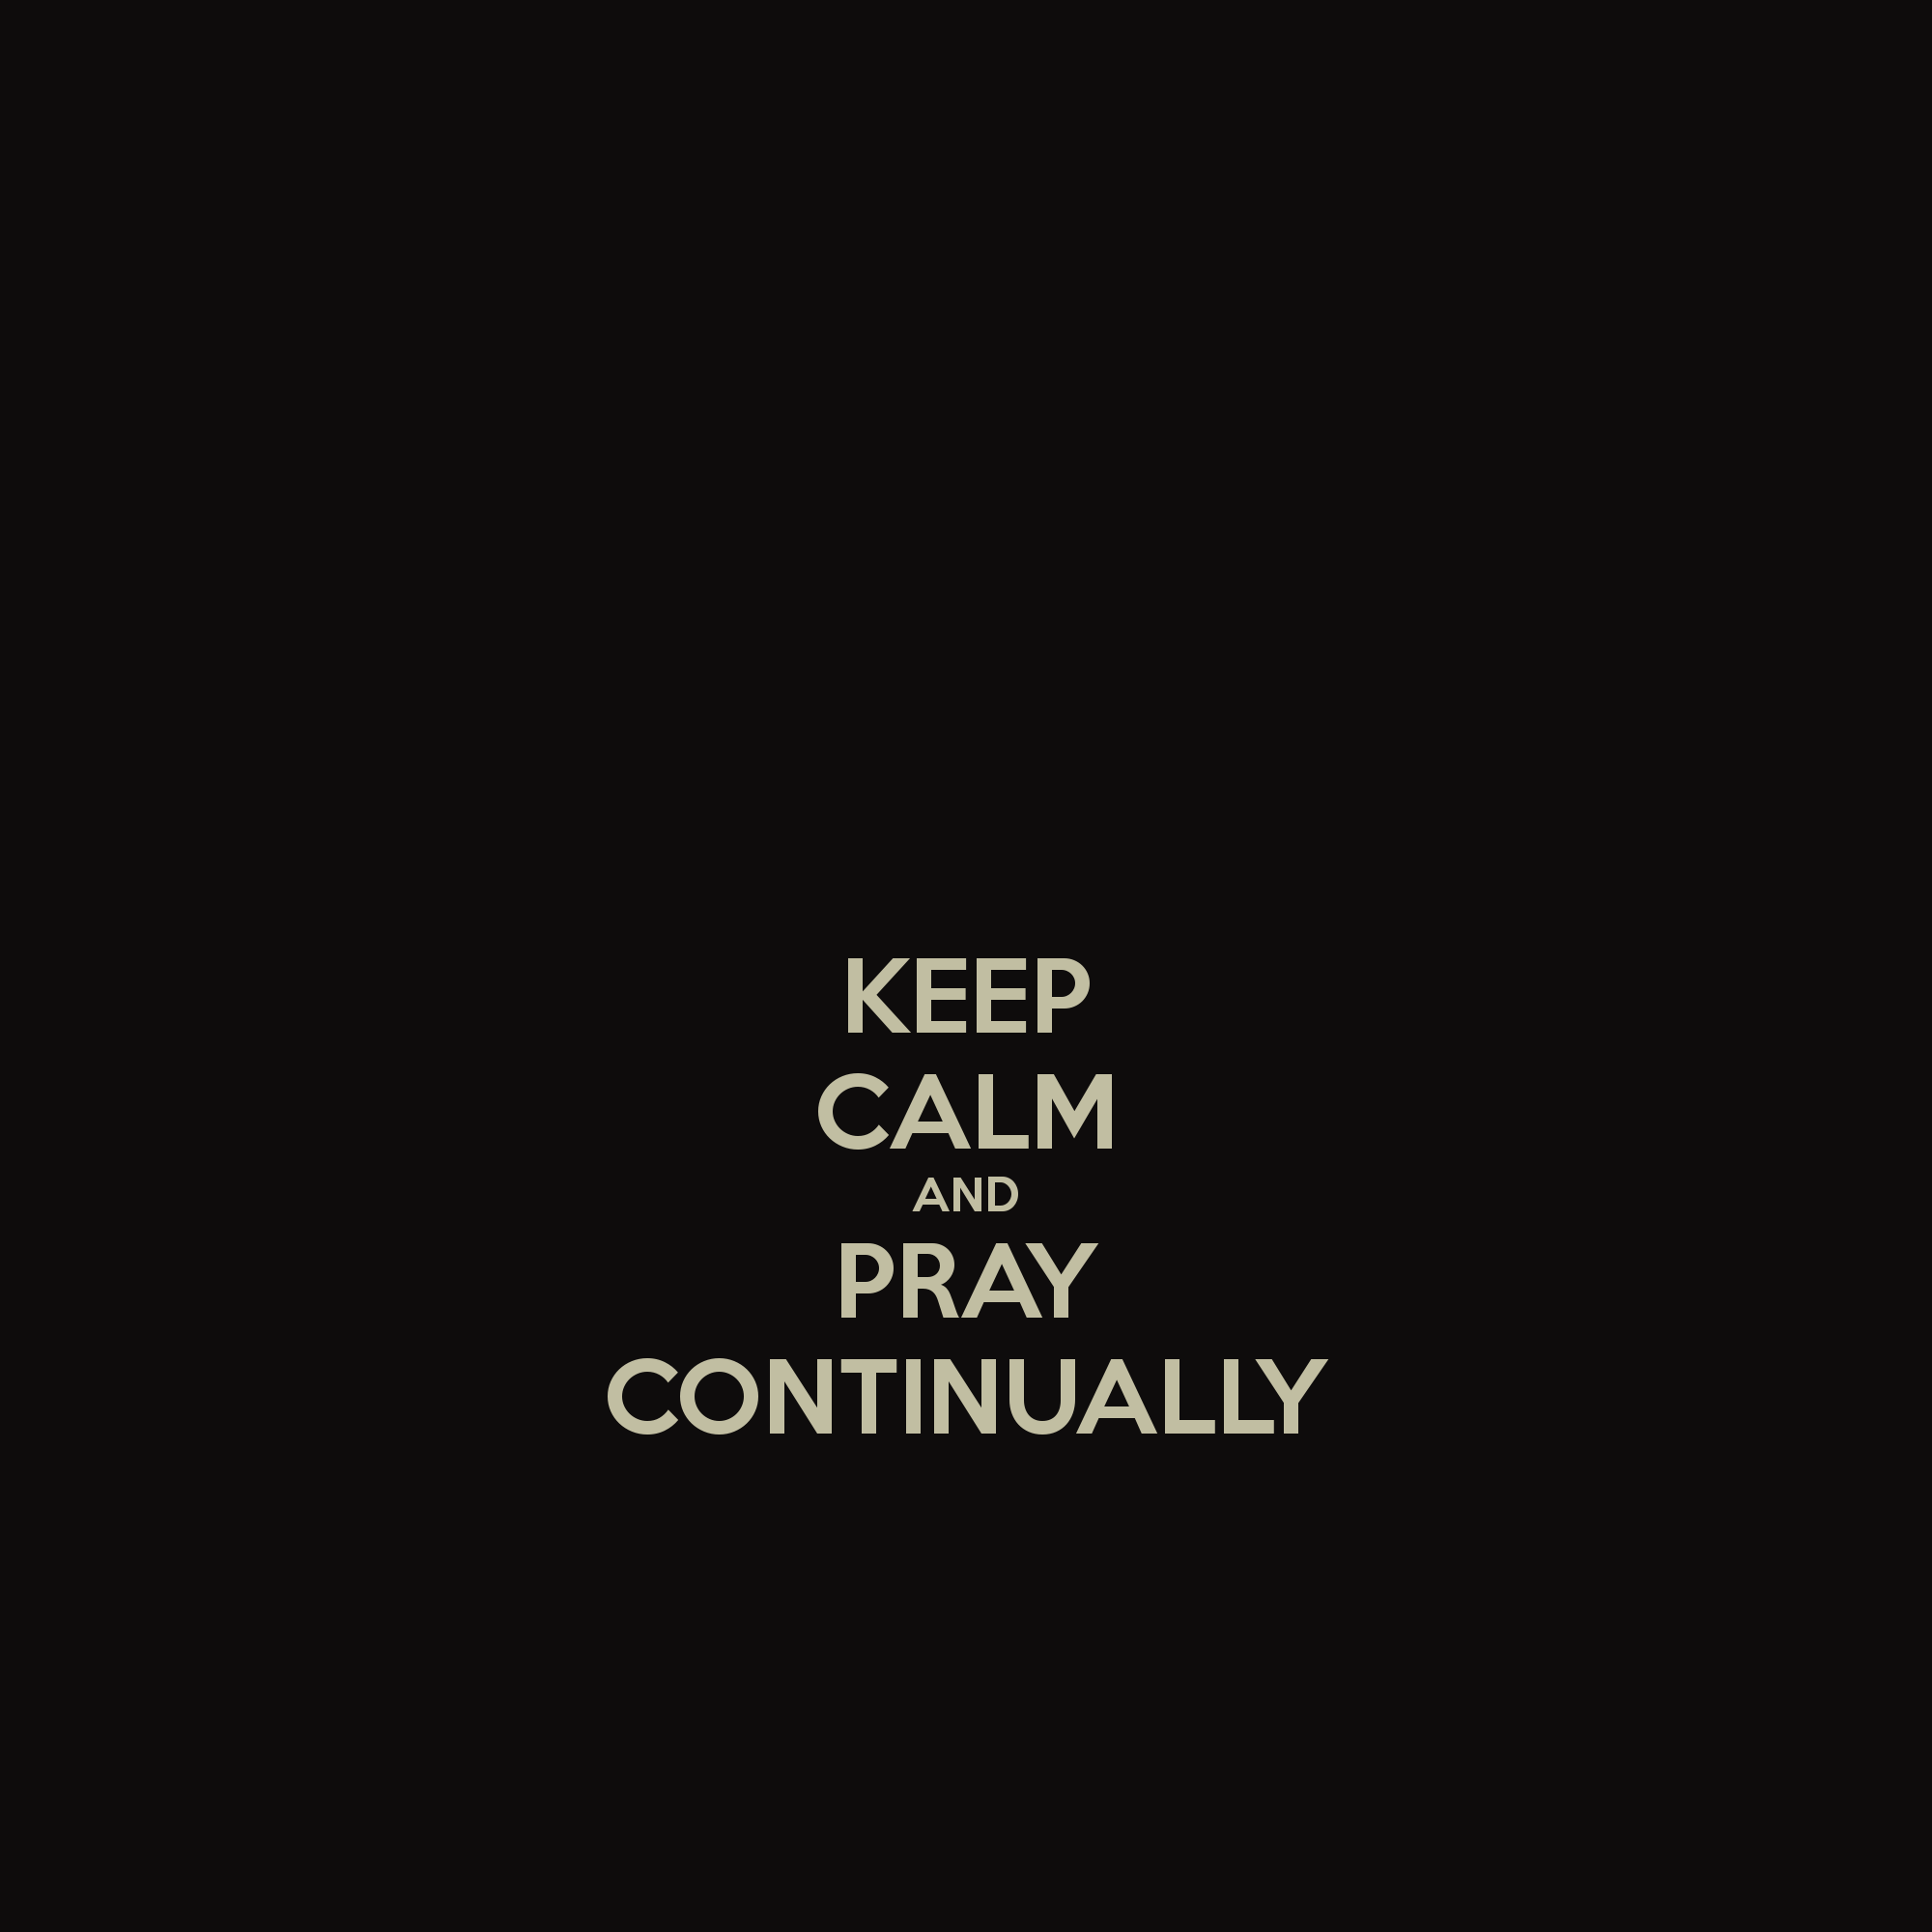 KEEP CALM AND PRAY CONTINUALLY   KEEP CALM AND CARRY ON Image